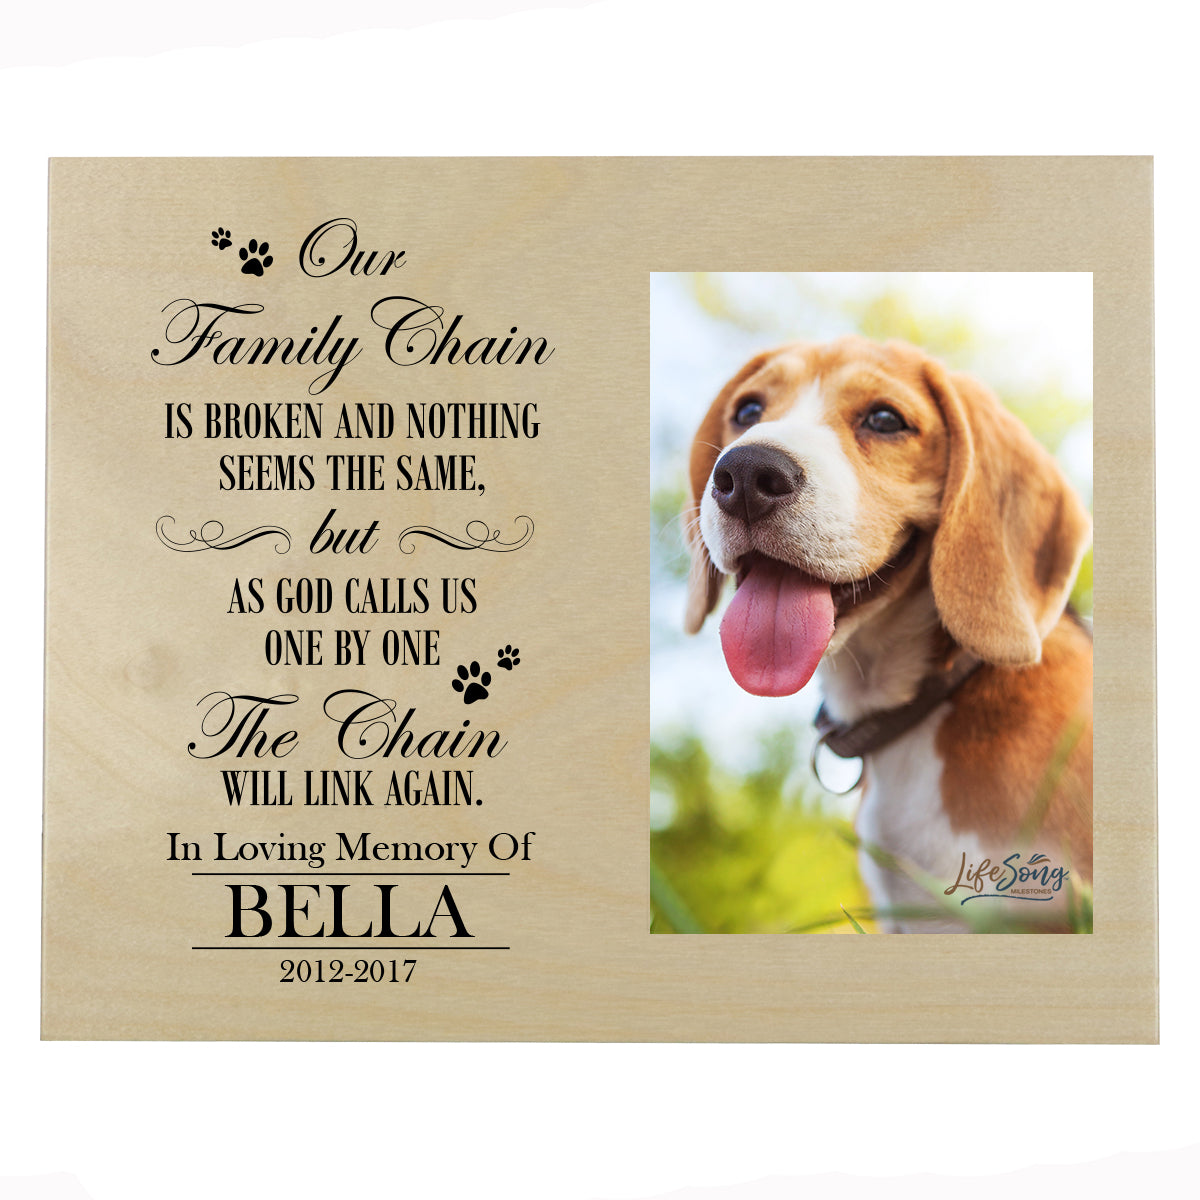 Pet Memorial Photo Wall Plaque Décor - Our Family Chain Is Broken